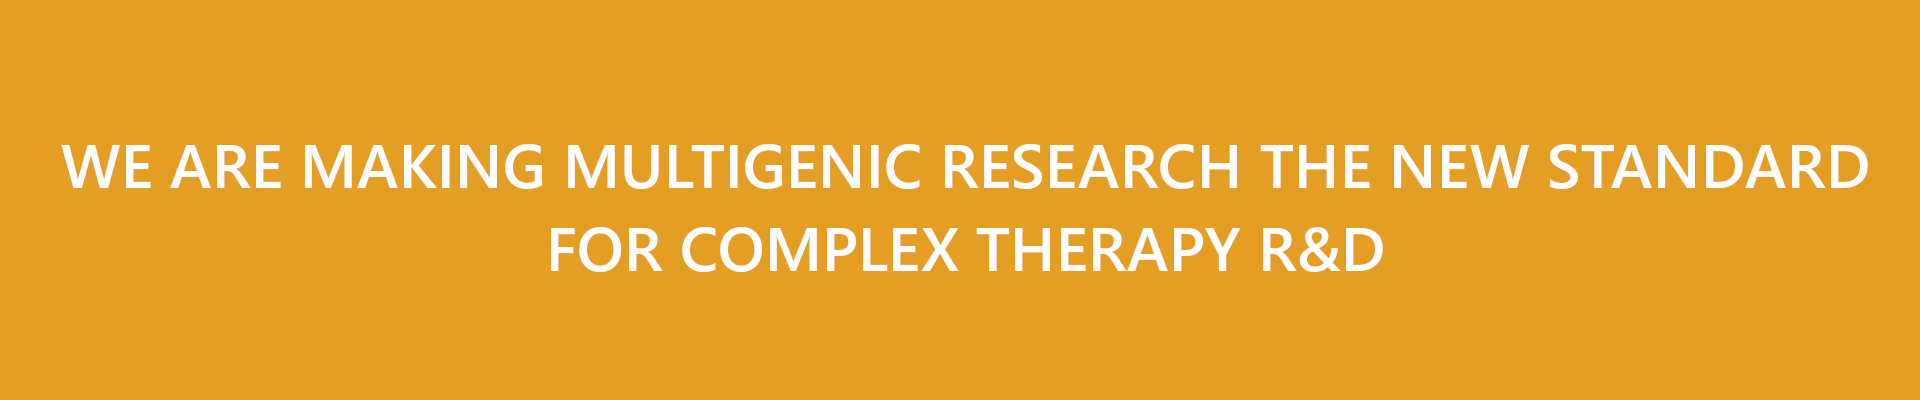 We are making MultiGenic research the new standard for complex Therapy R&D